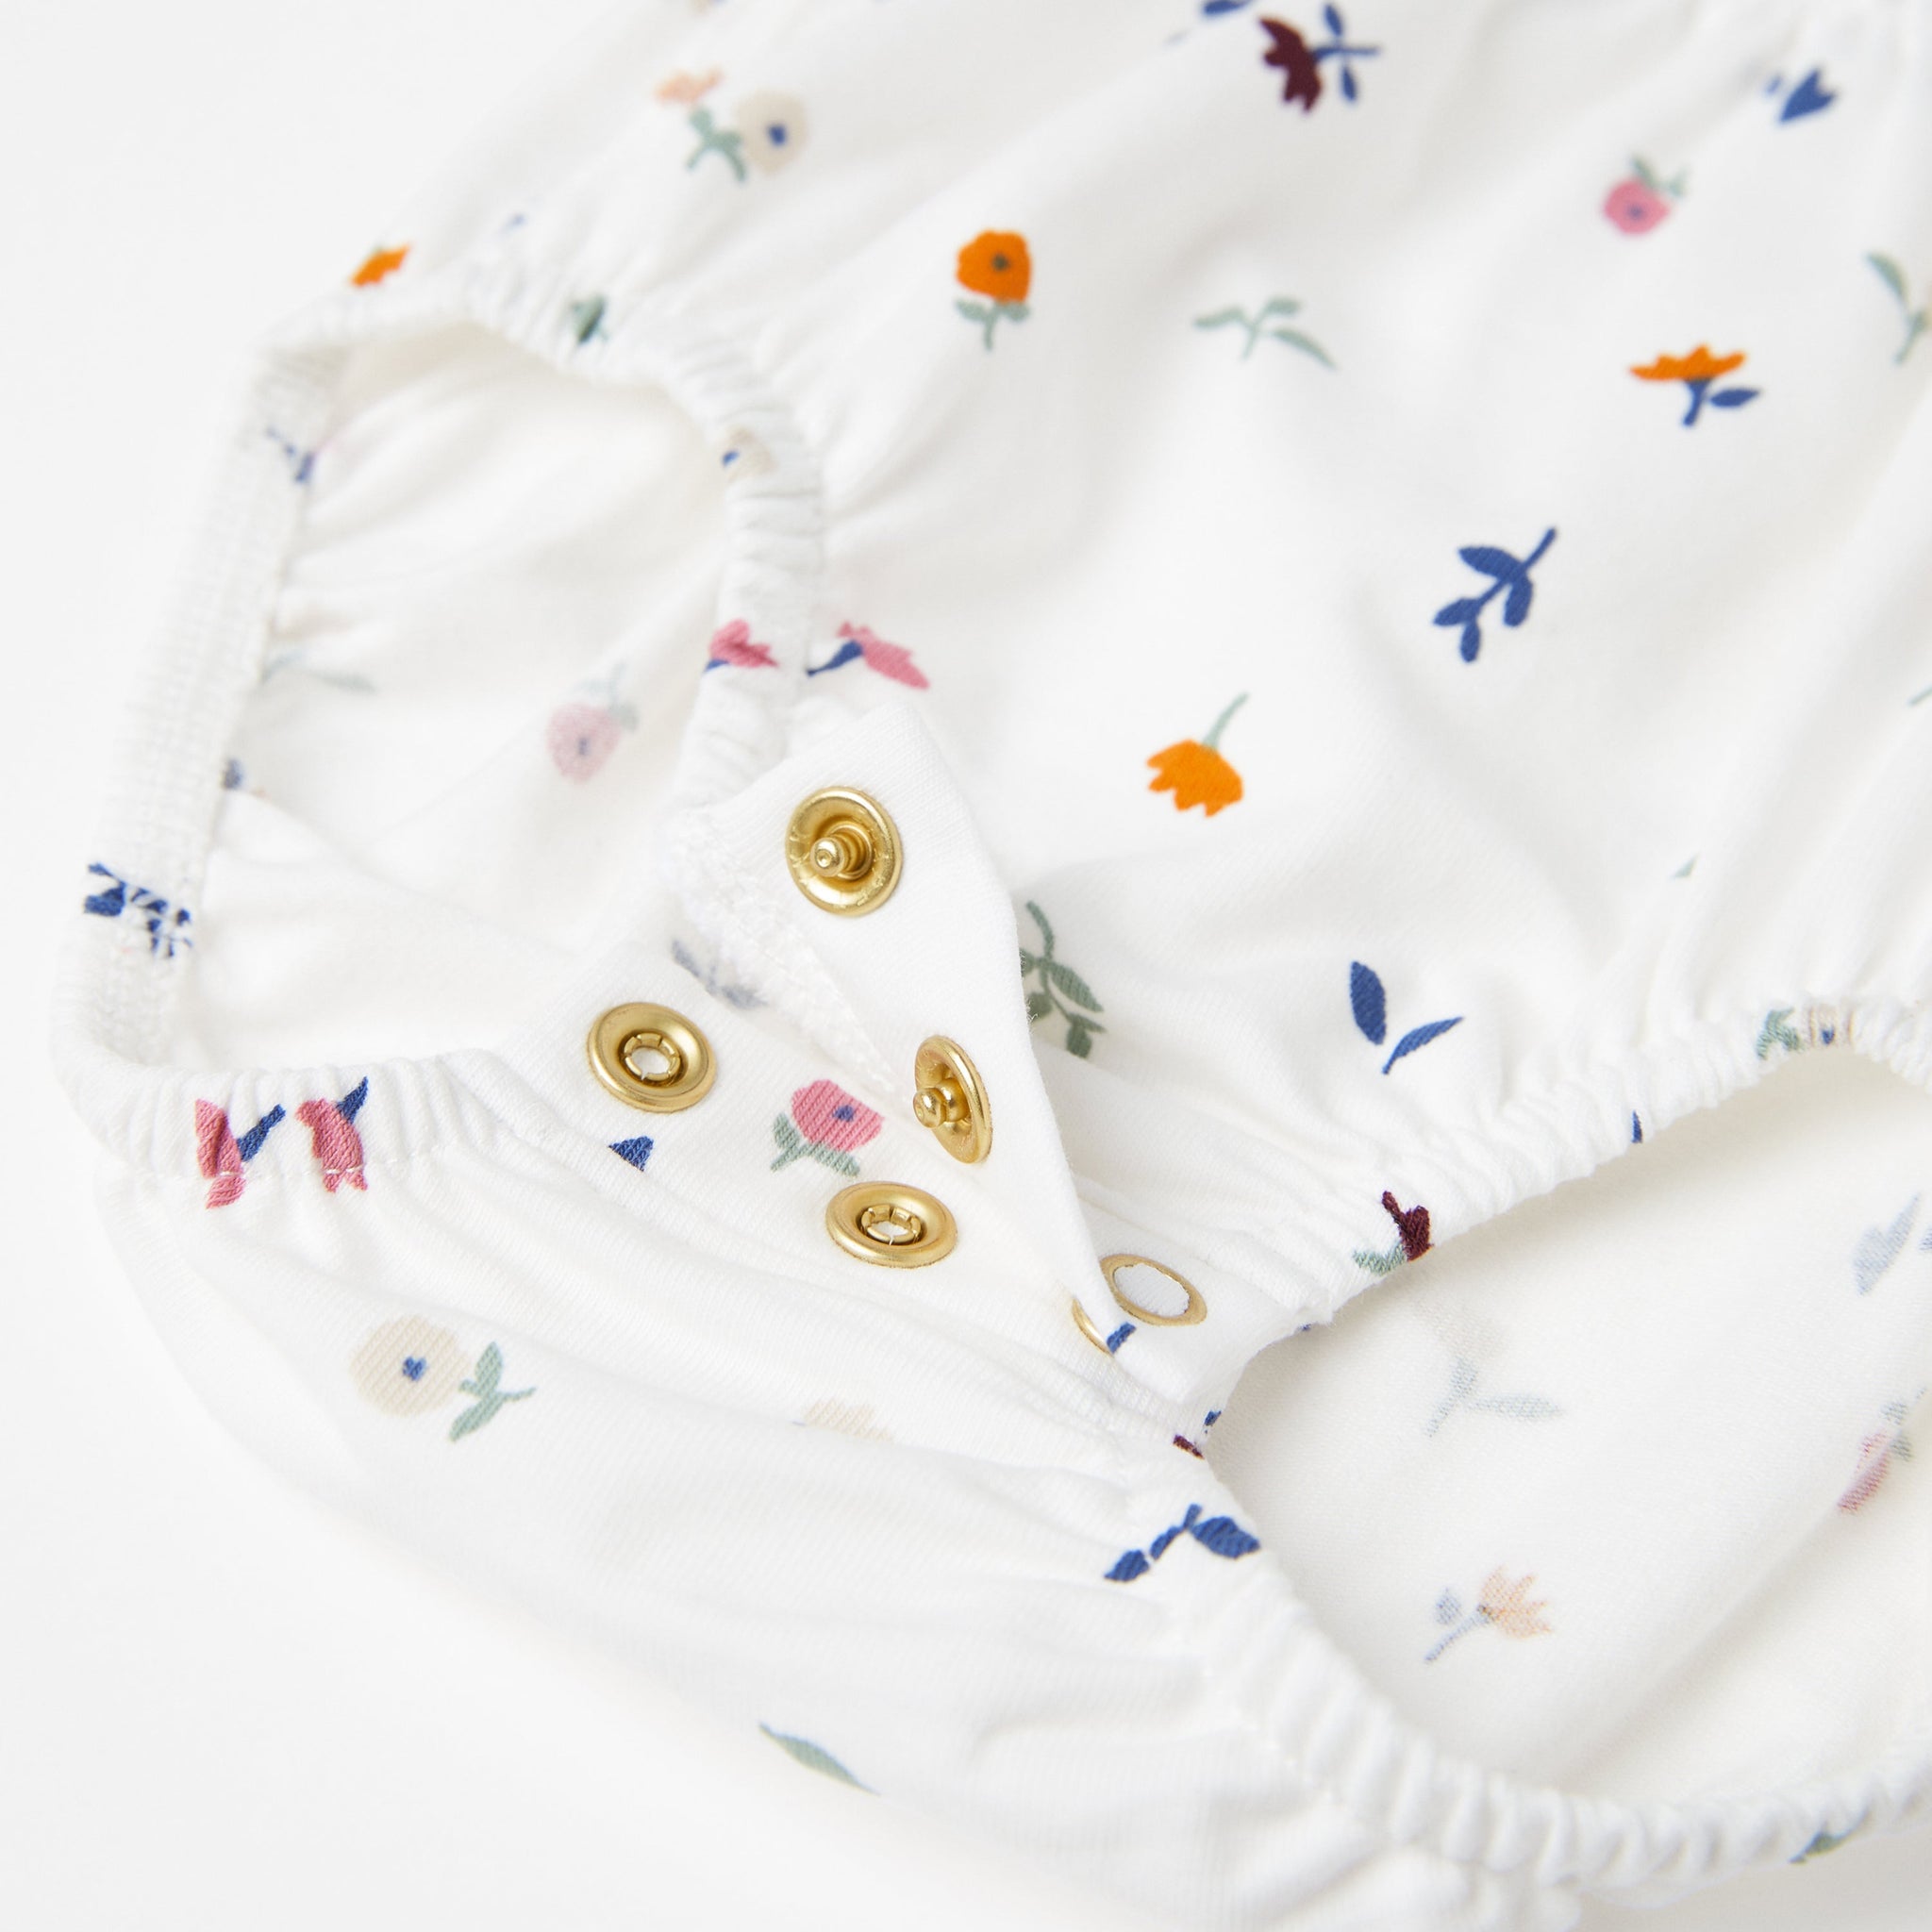 Floral White Newborn Babygrow from the Polarn O. Pyret Kidswear collection. The best ethical kids clothes